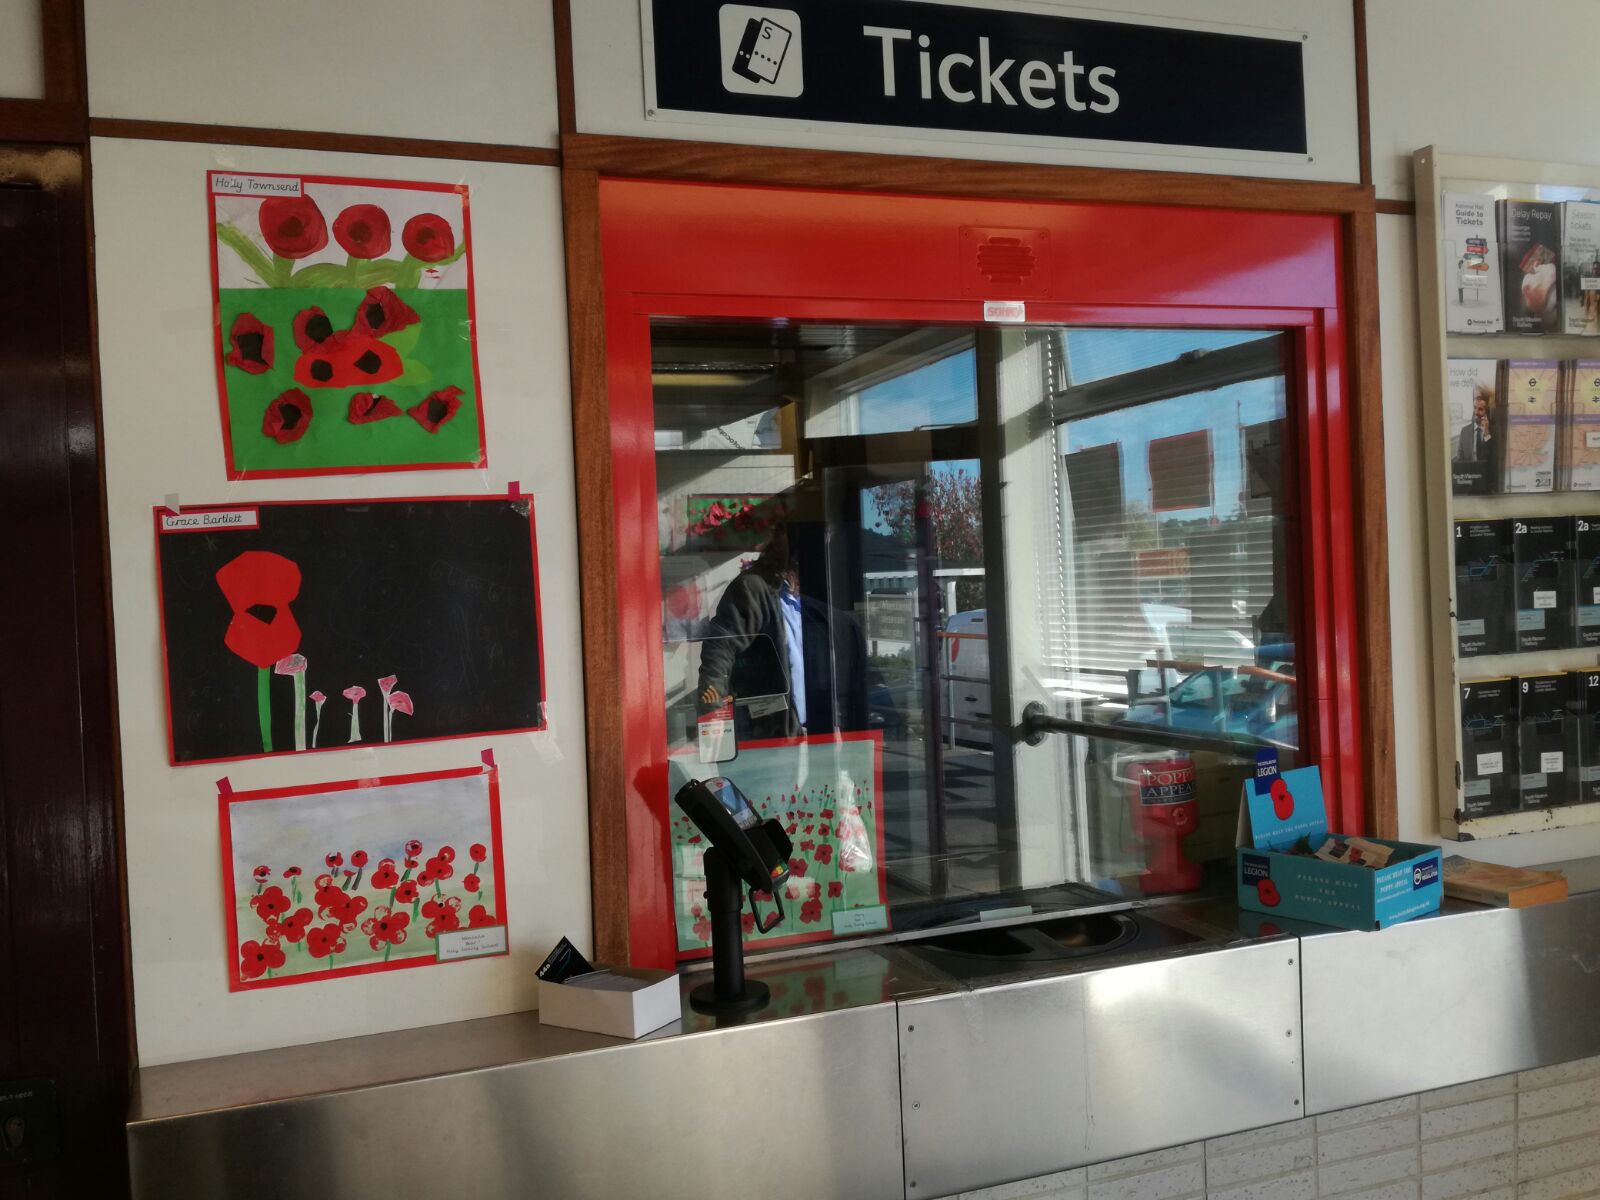 Artwork on display at South Western Railway stations to raise awareness for Poppy Appeal 2017